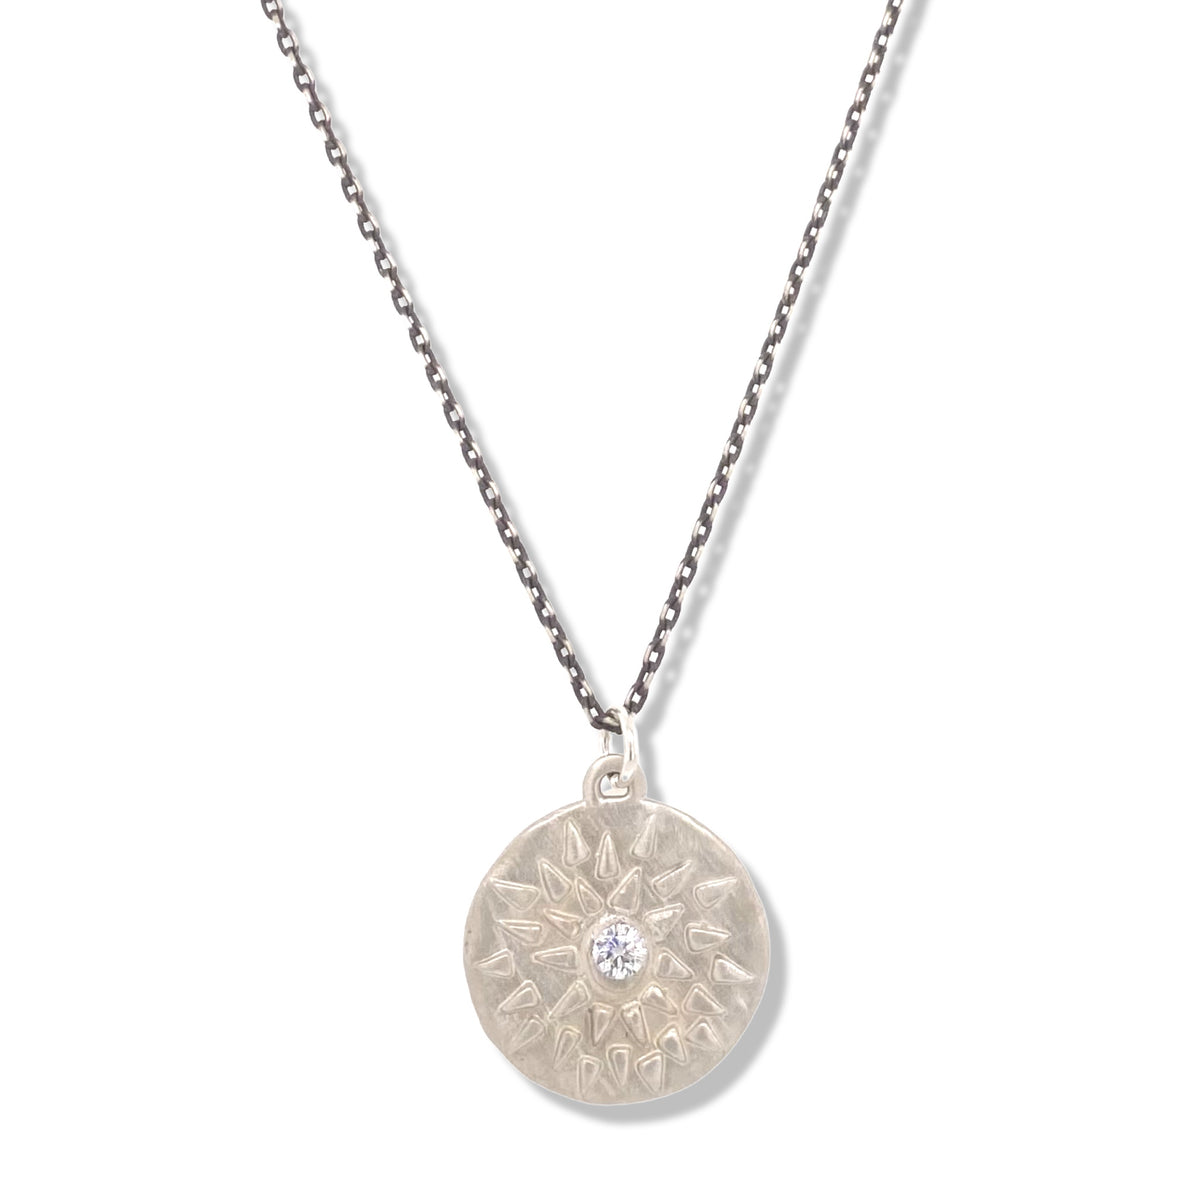 Mira Necklace in Silver | KSD Jewelry